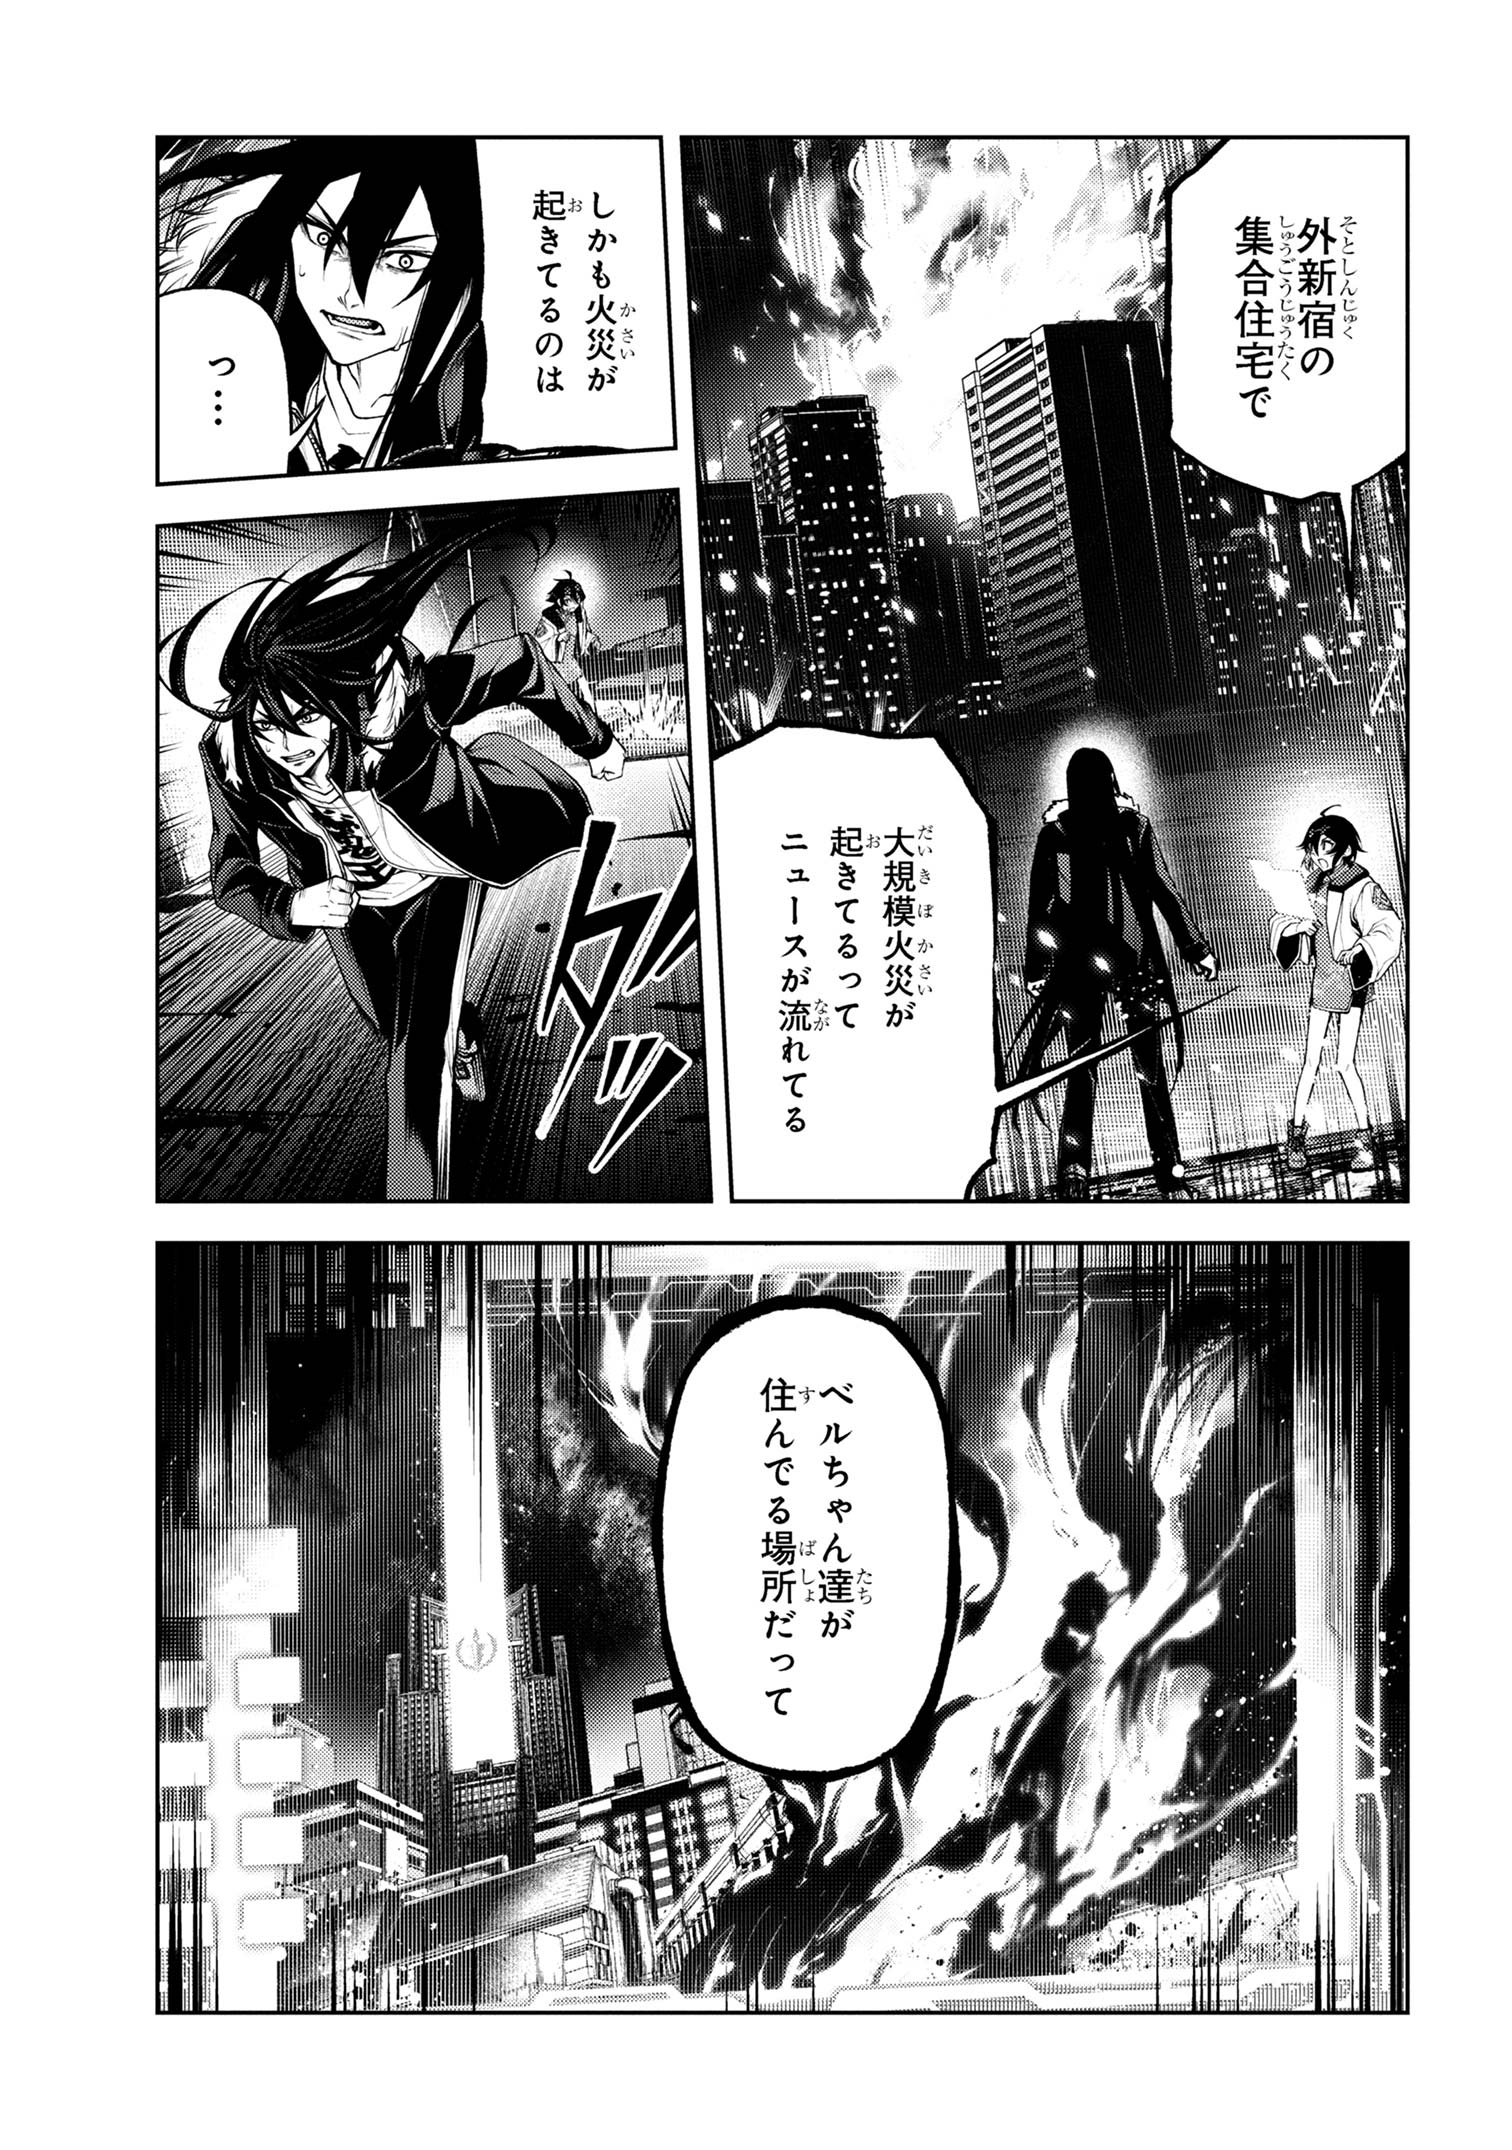 Maou 2099 - Chapter 7.3 - Page 12